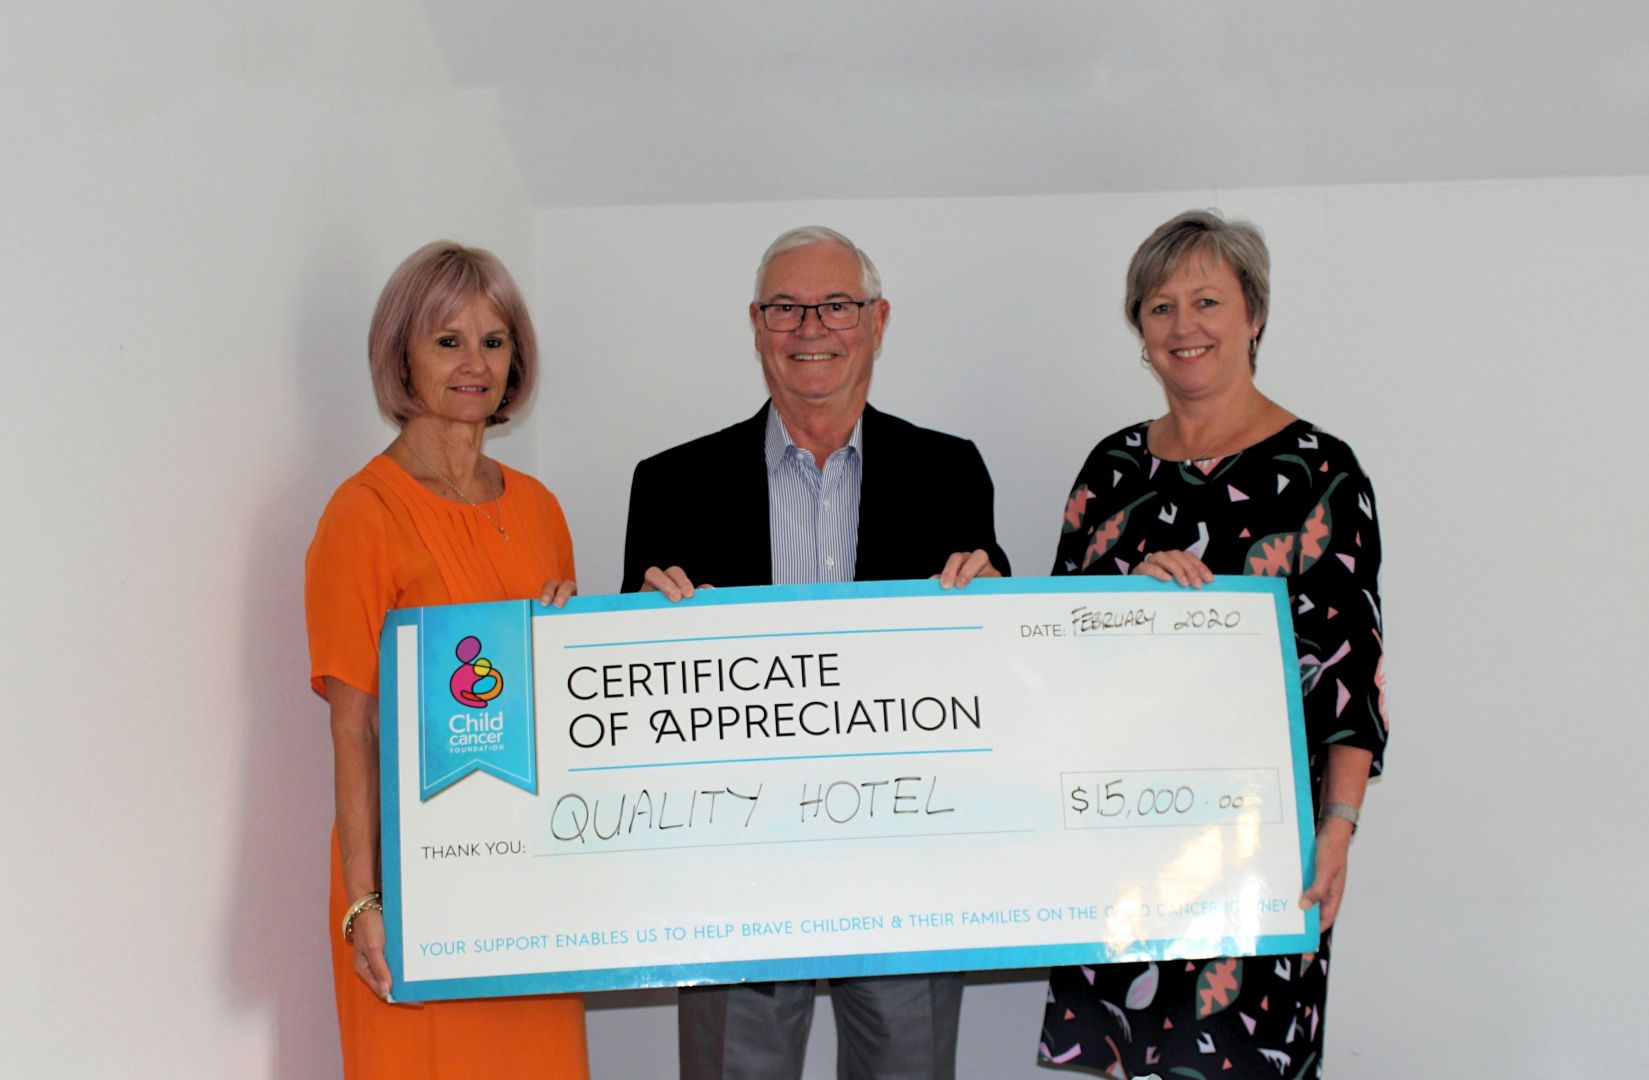 The Parnell Hotel Donates $200,000 To Charitable Causes Per Annum